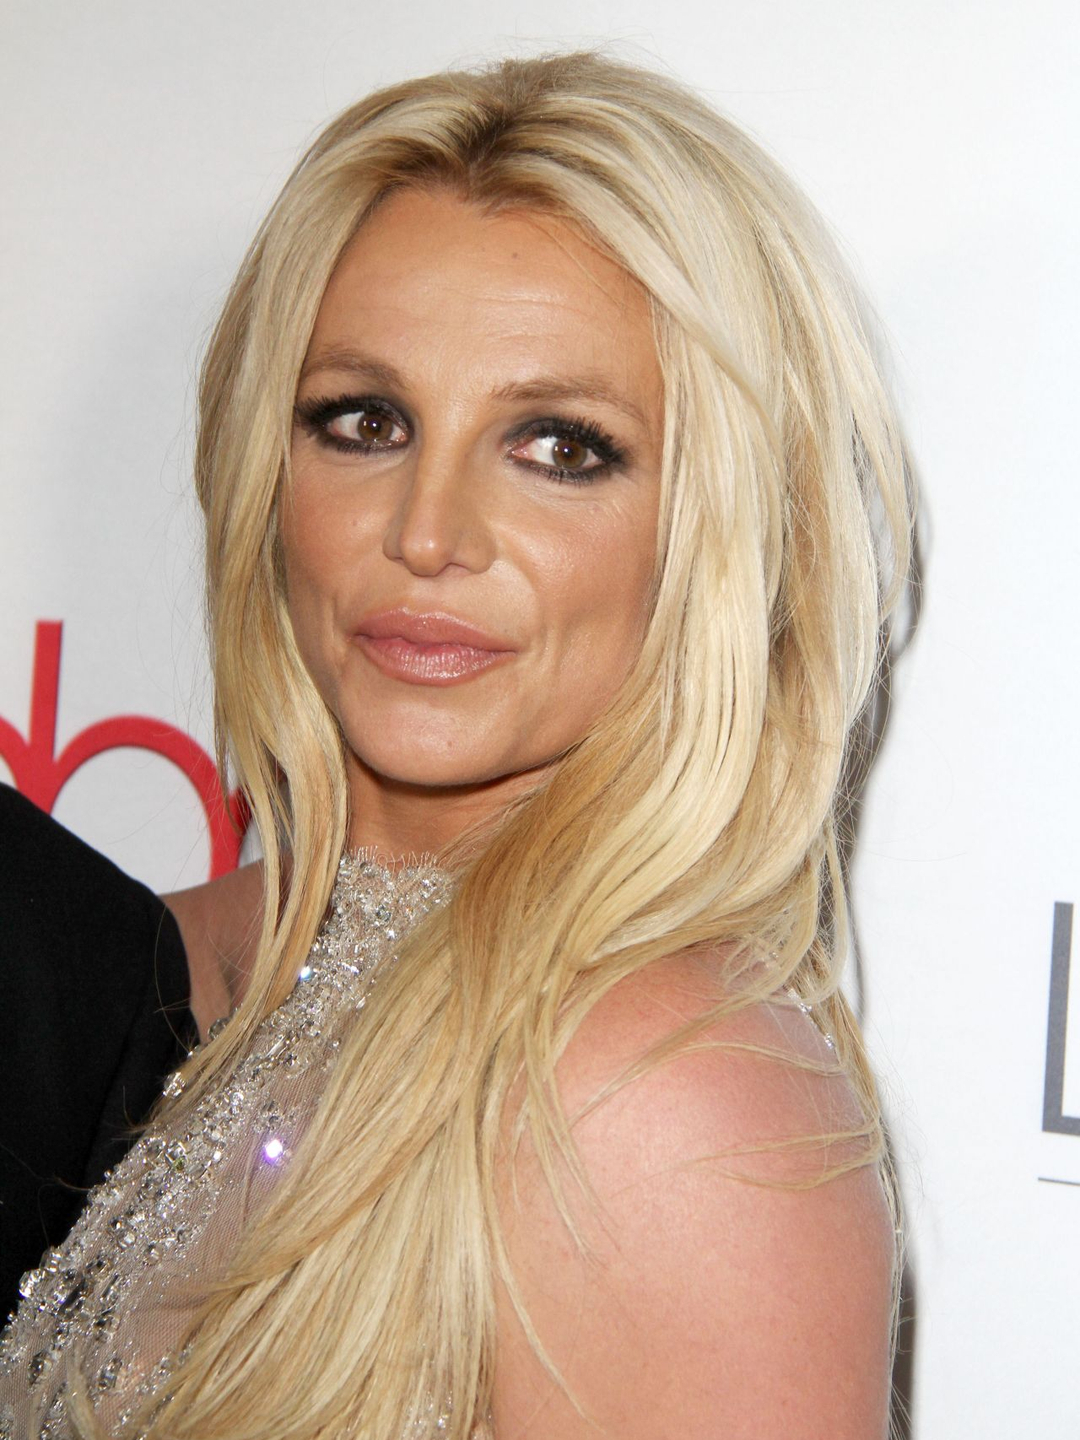 Britney Spears unphotoshopped pictures